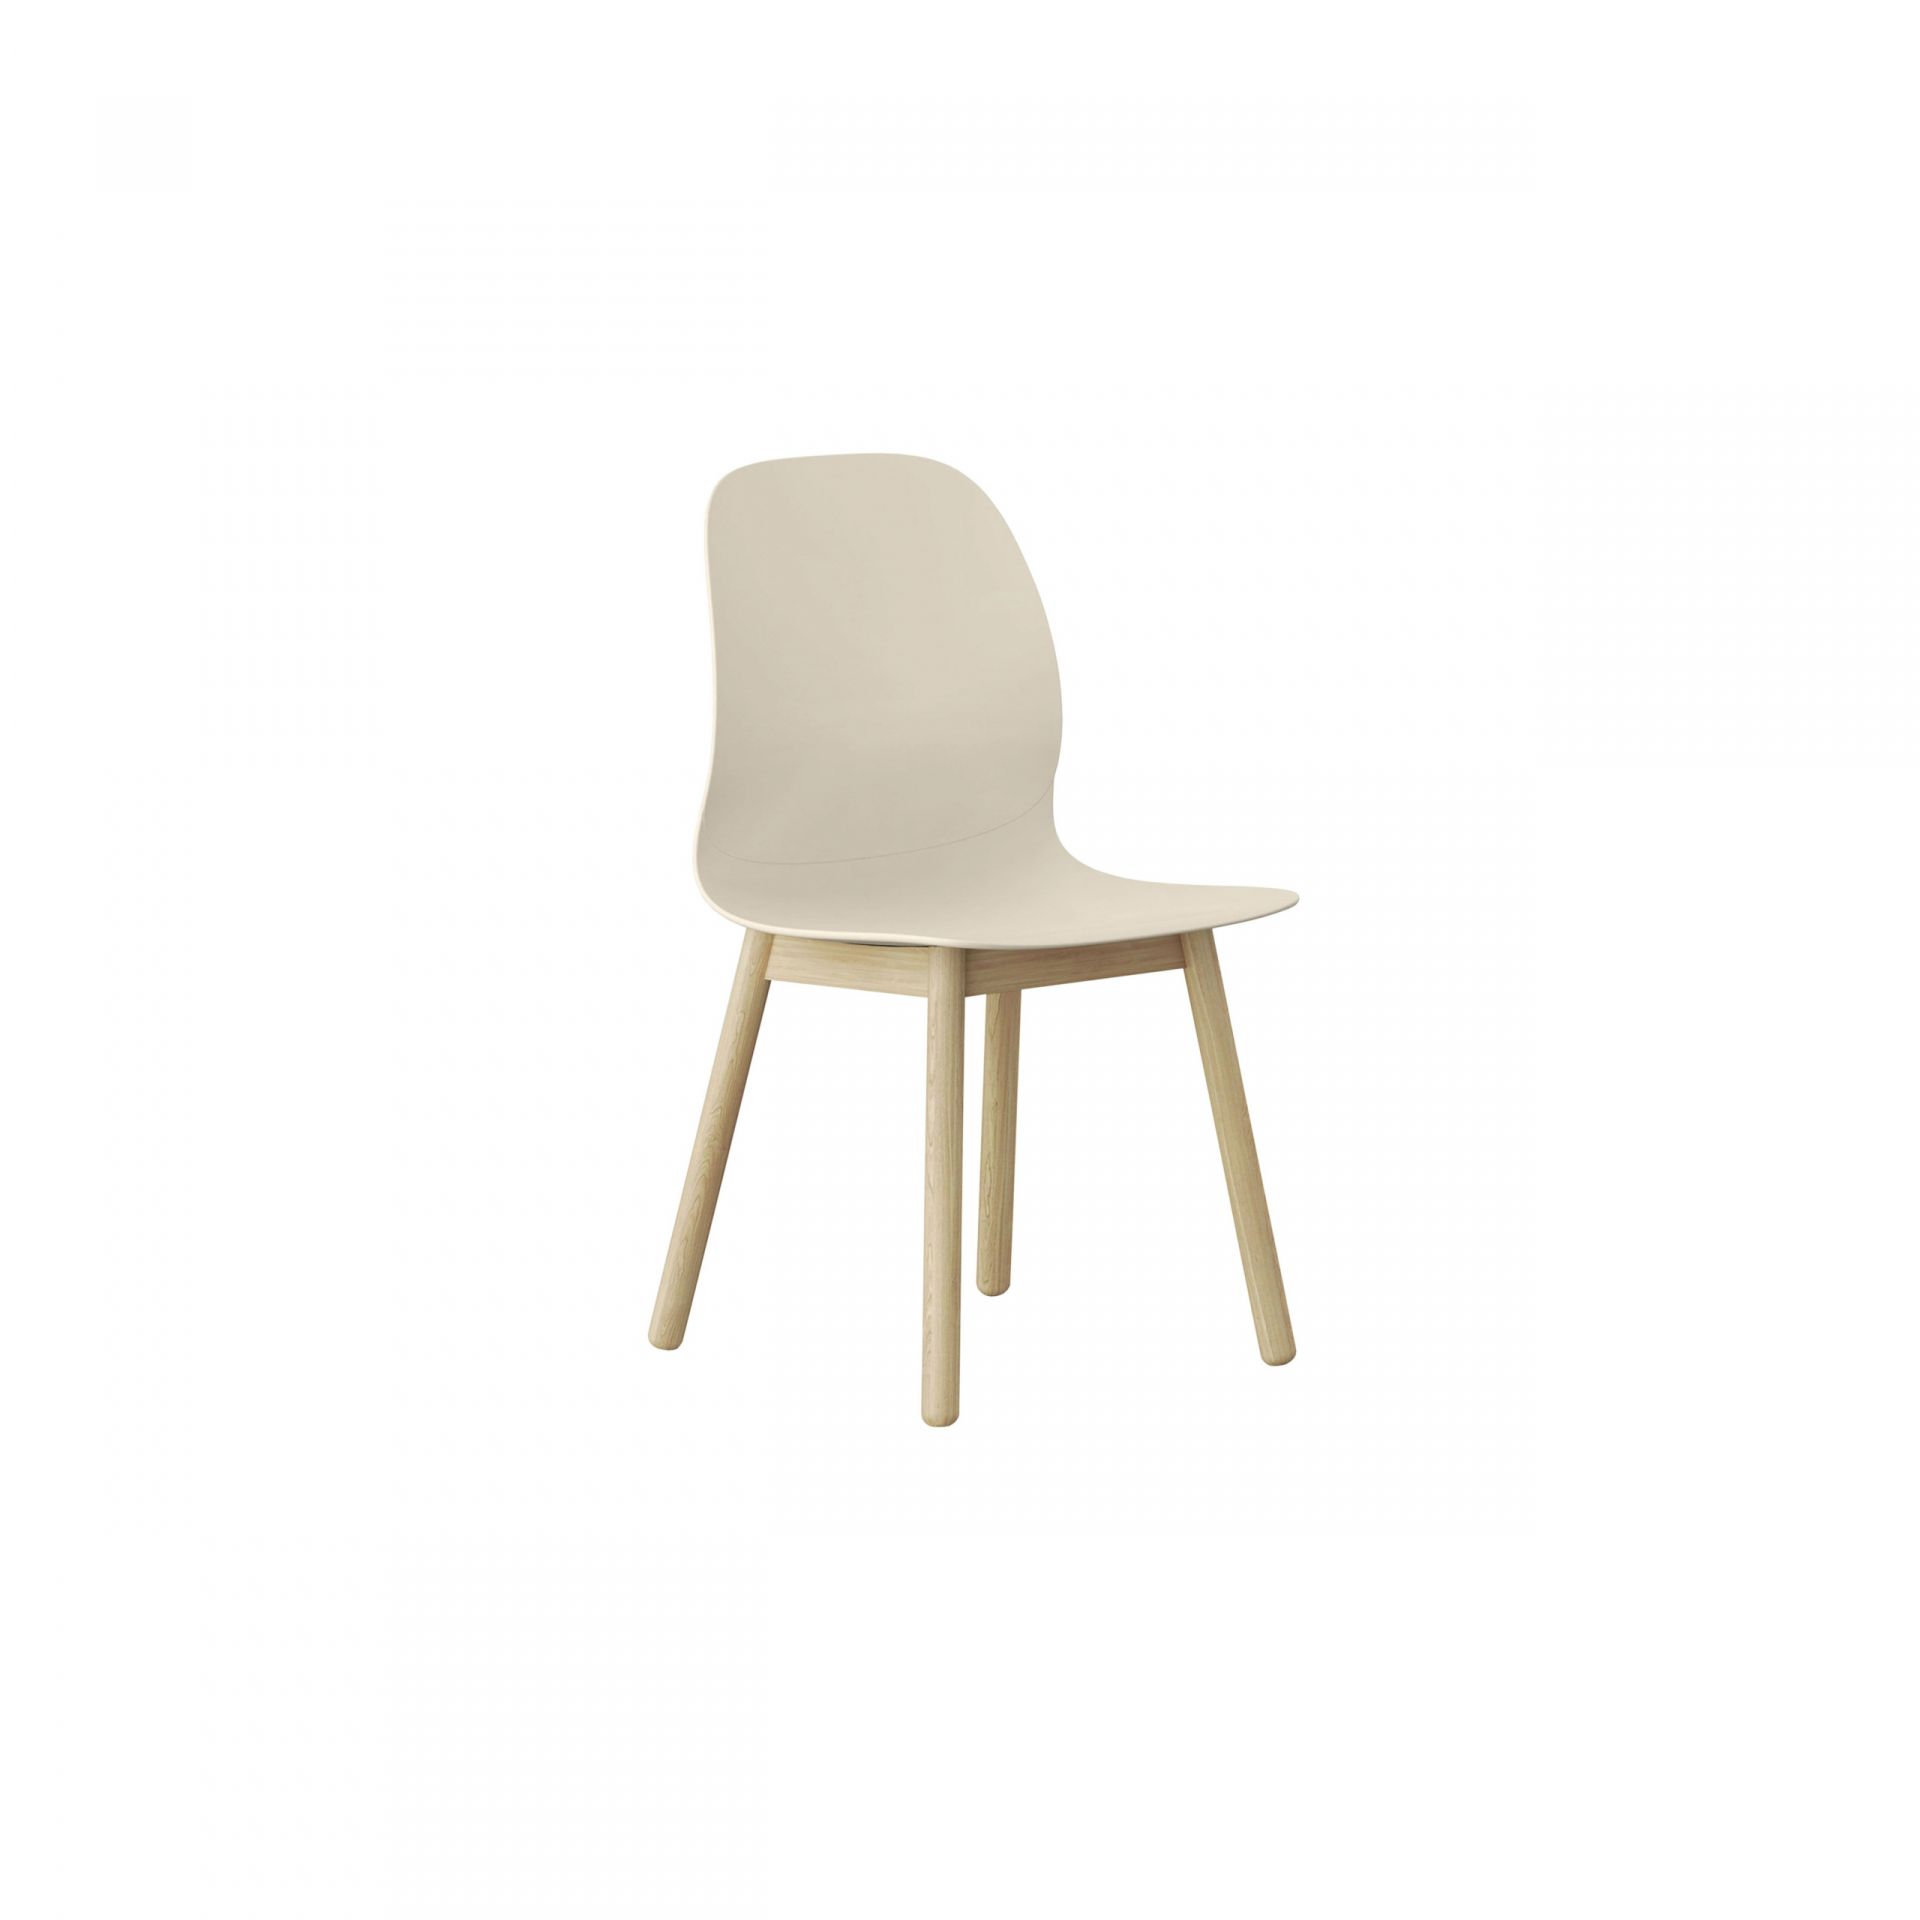 Archie Chair with wooden legs